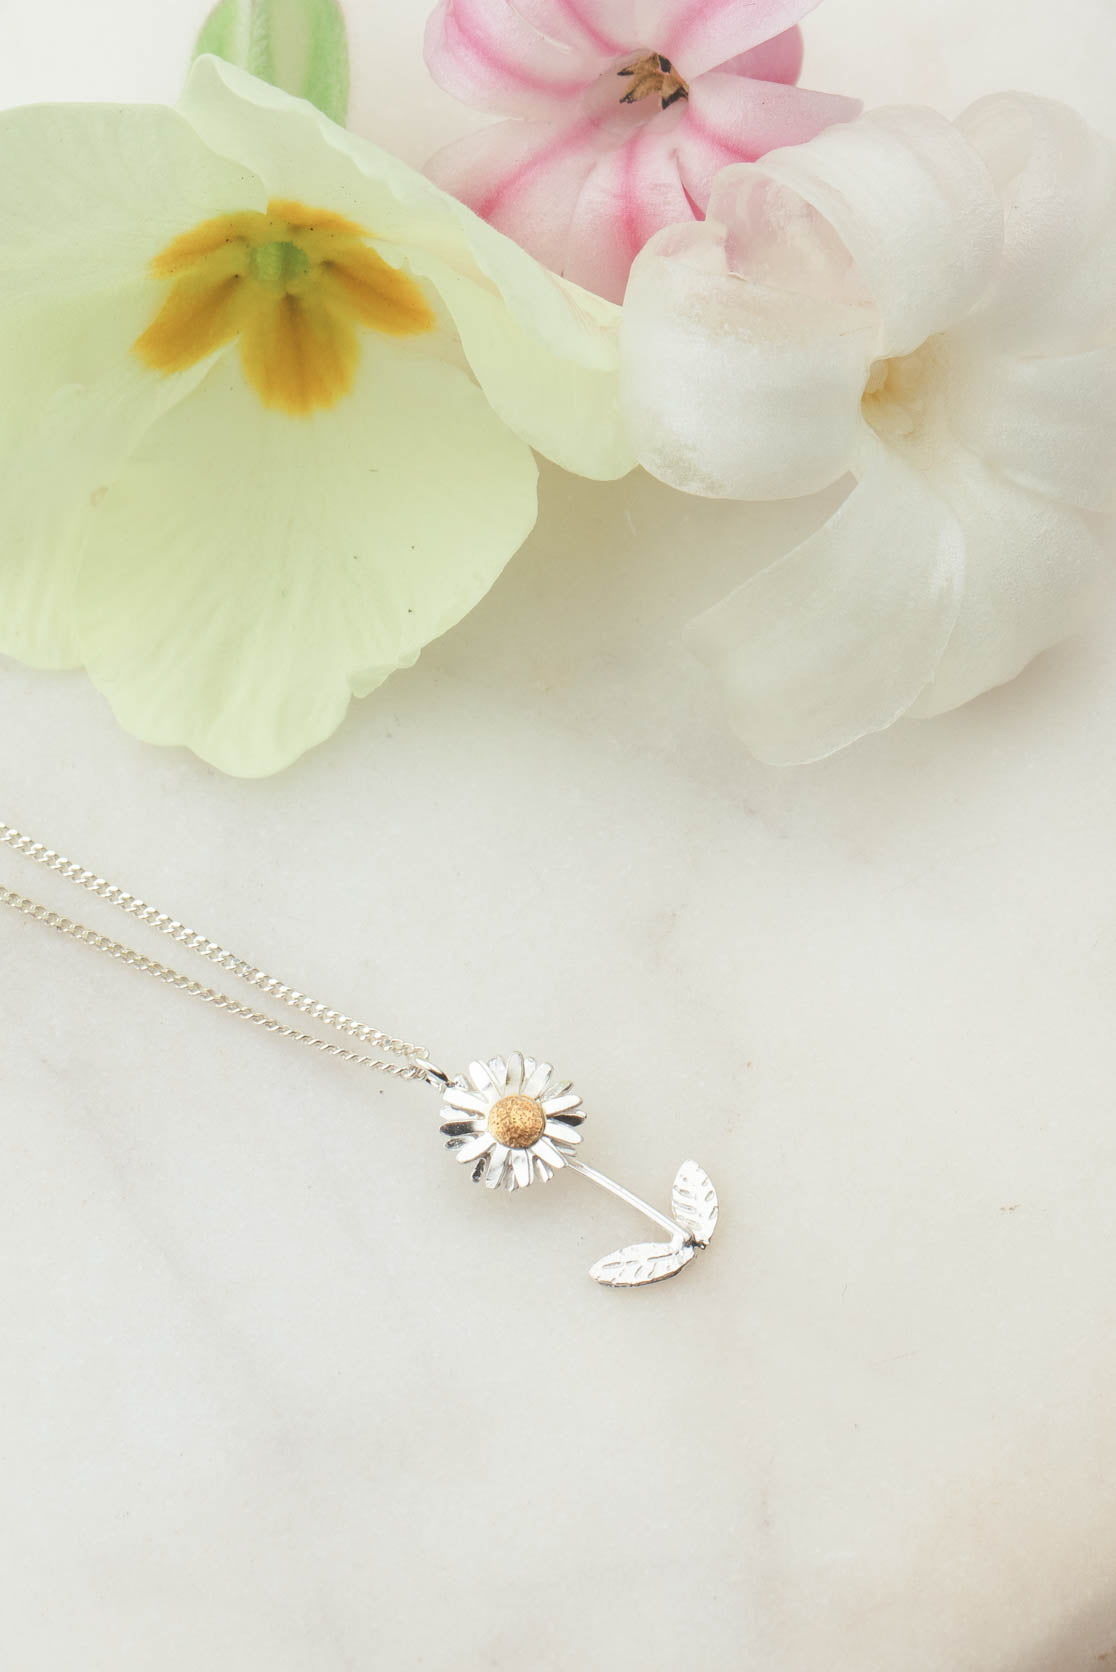 Handmade Sterling Silver and Gold Daisy Necklace With Stalk